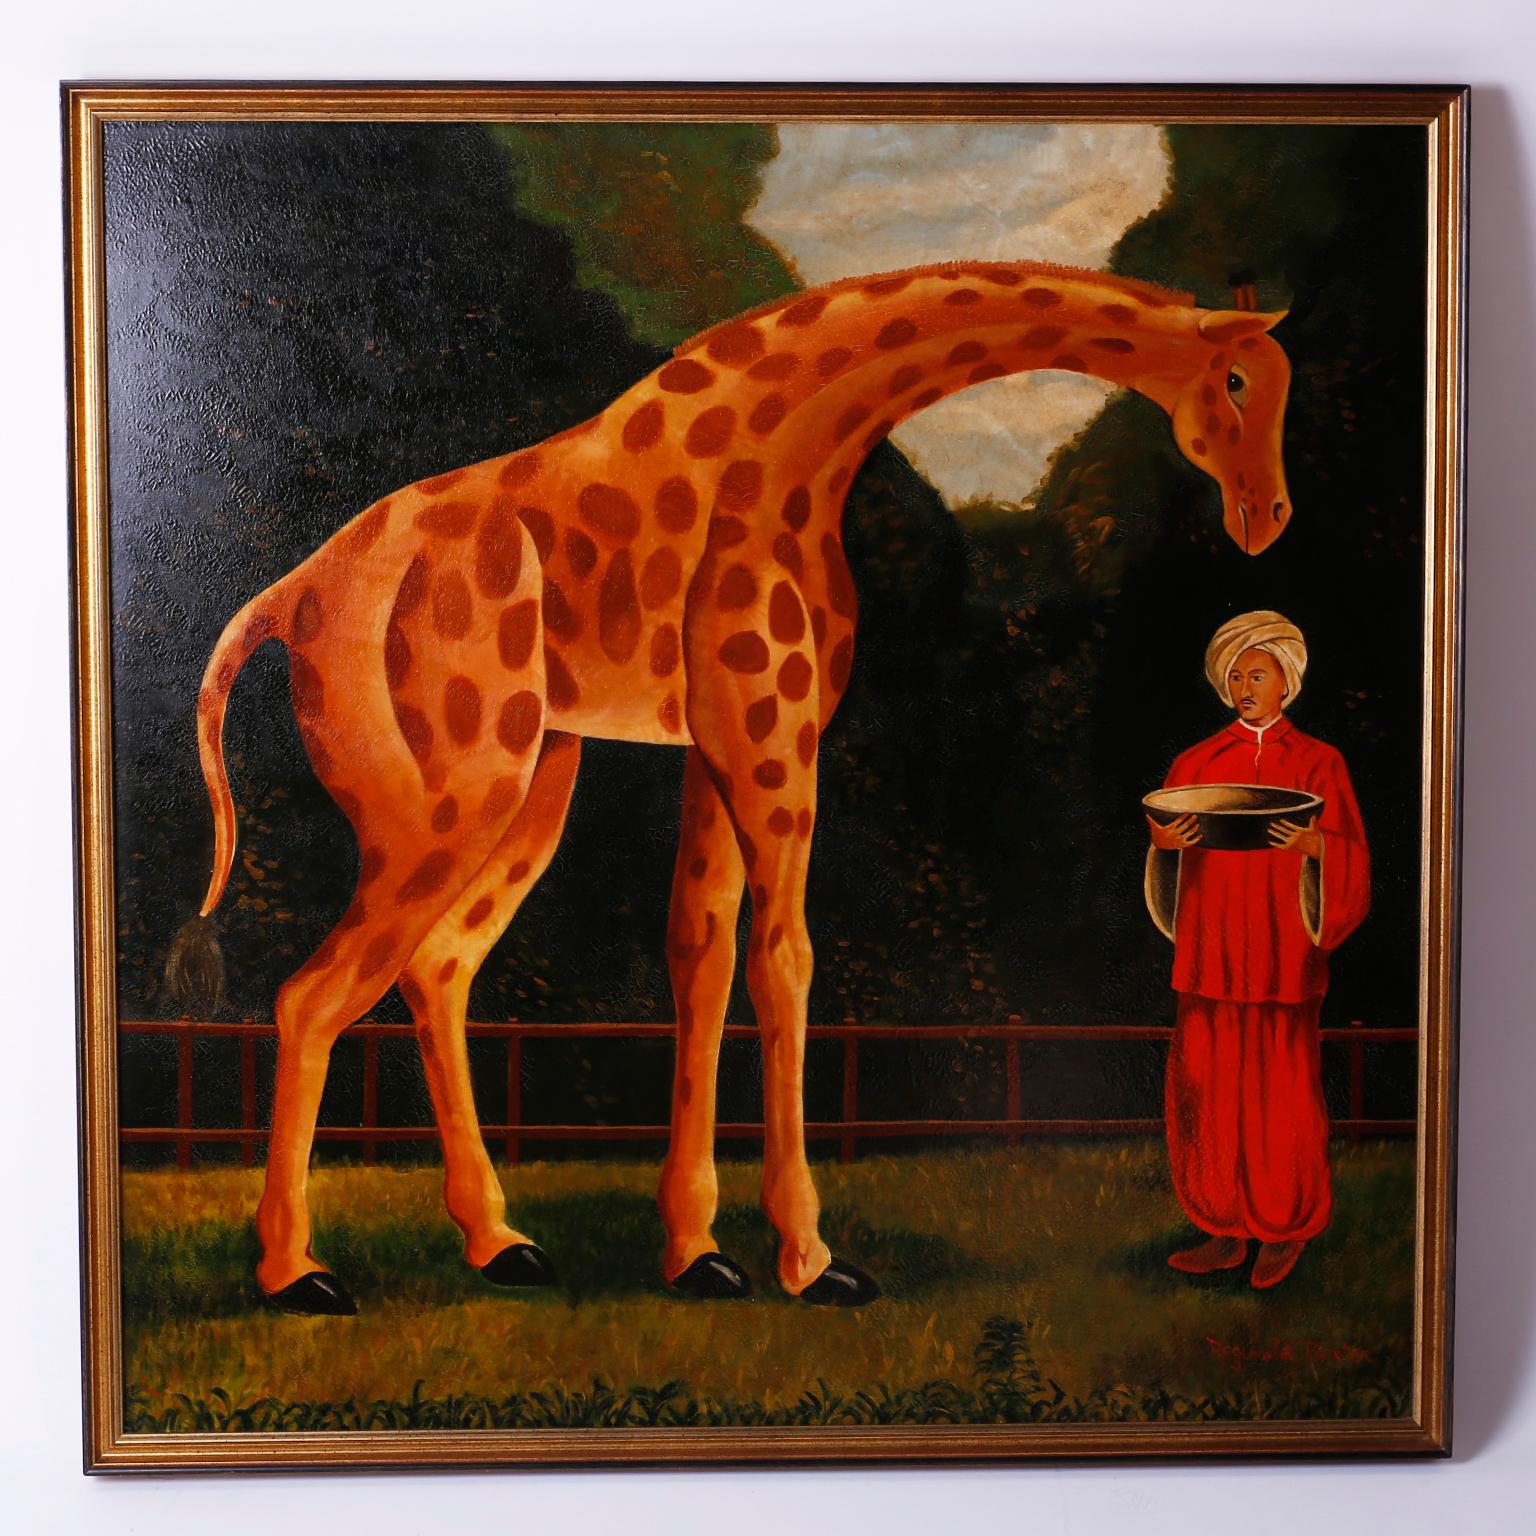 Unknown Animal Painting - Oil Painting on Canvas of a Giraffe by Reginald Baxter